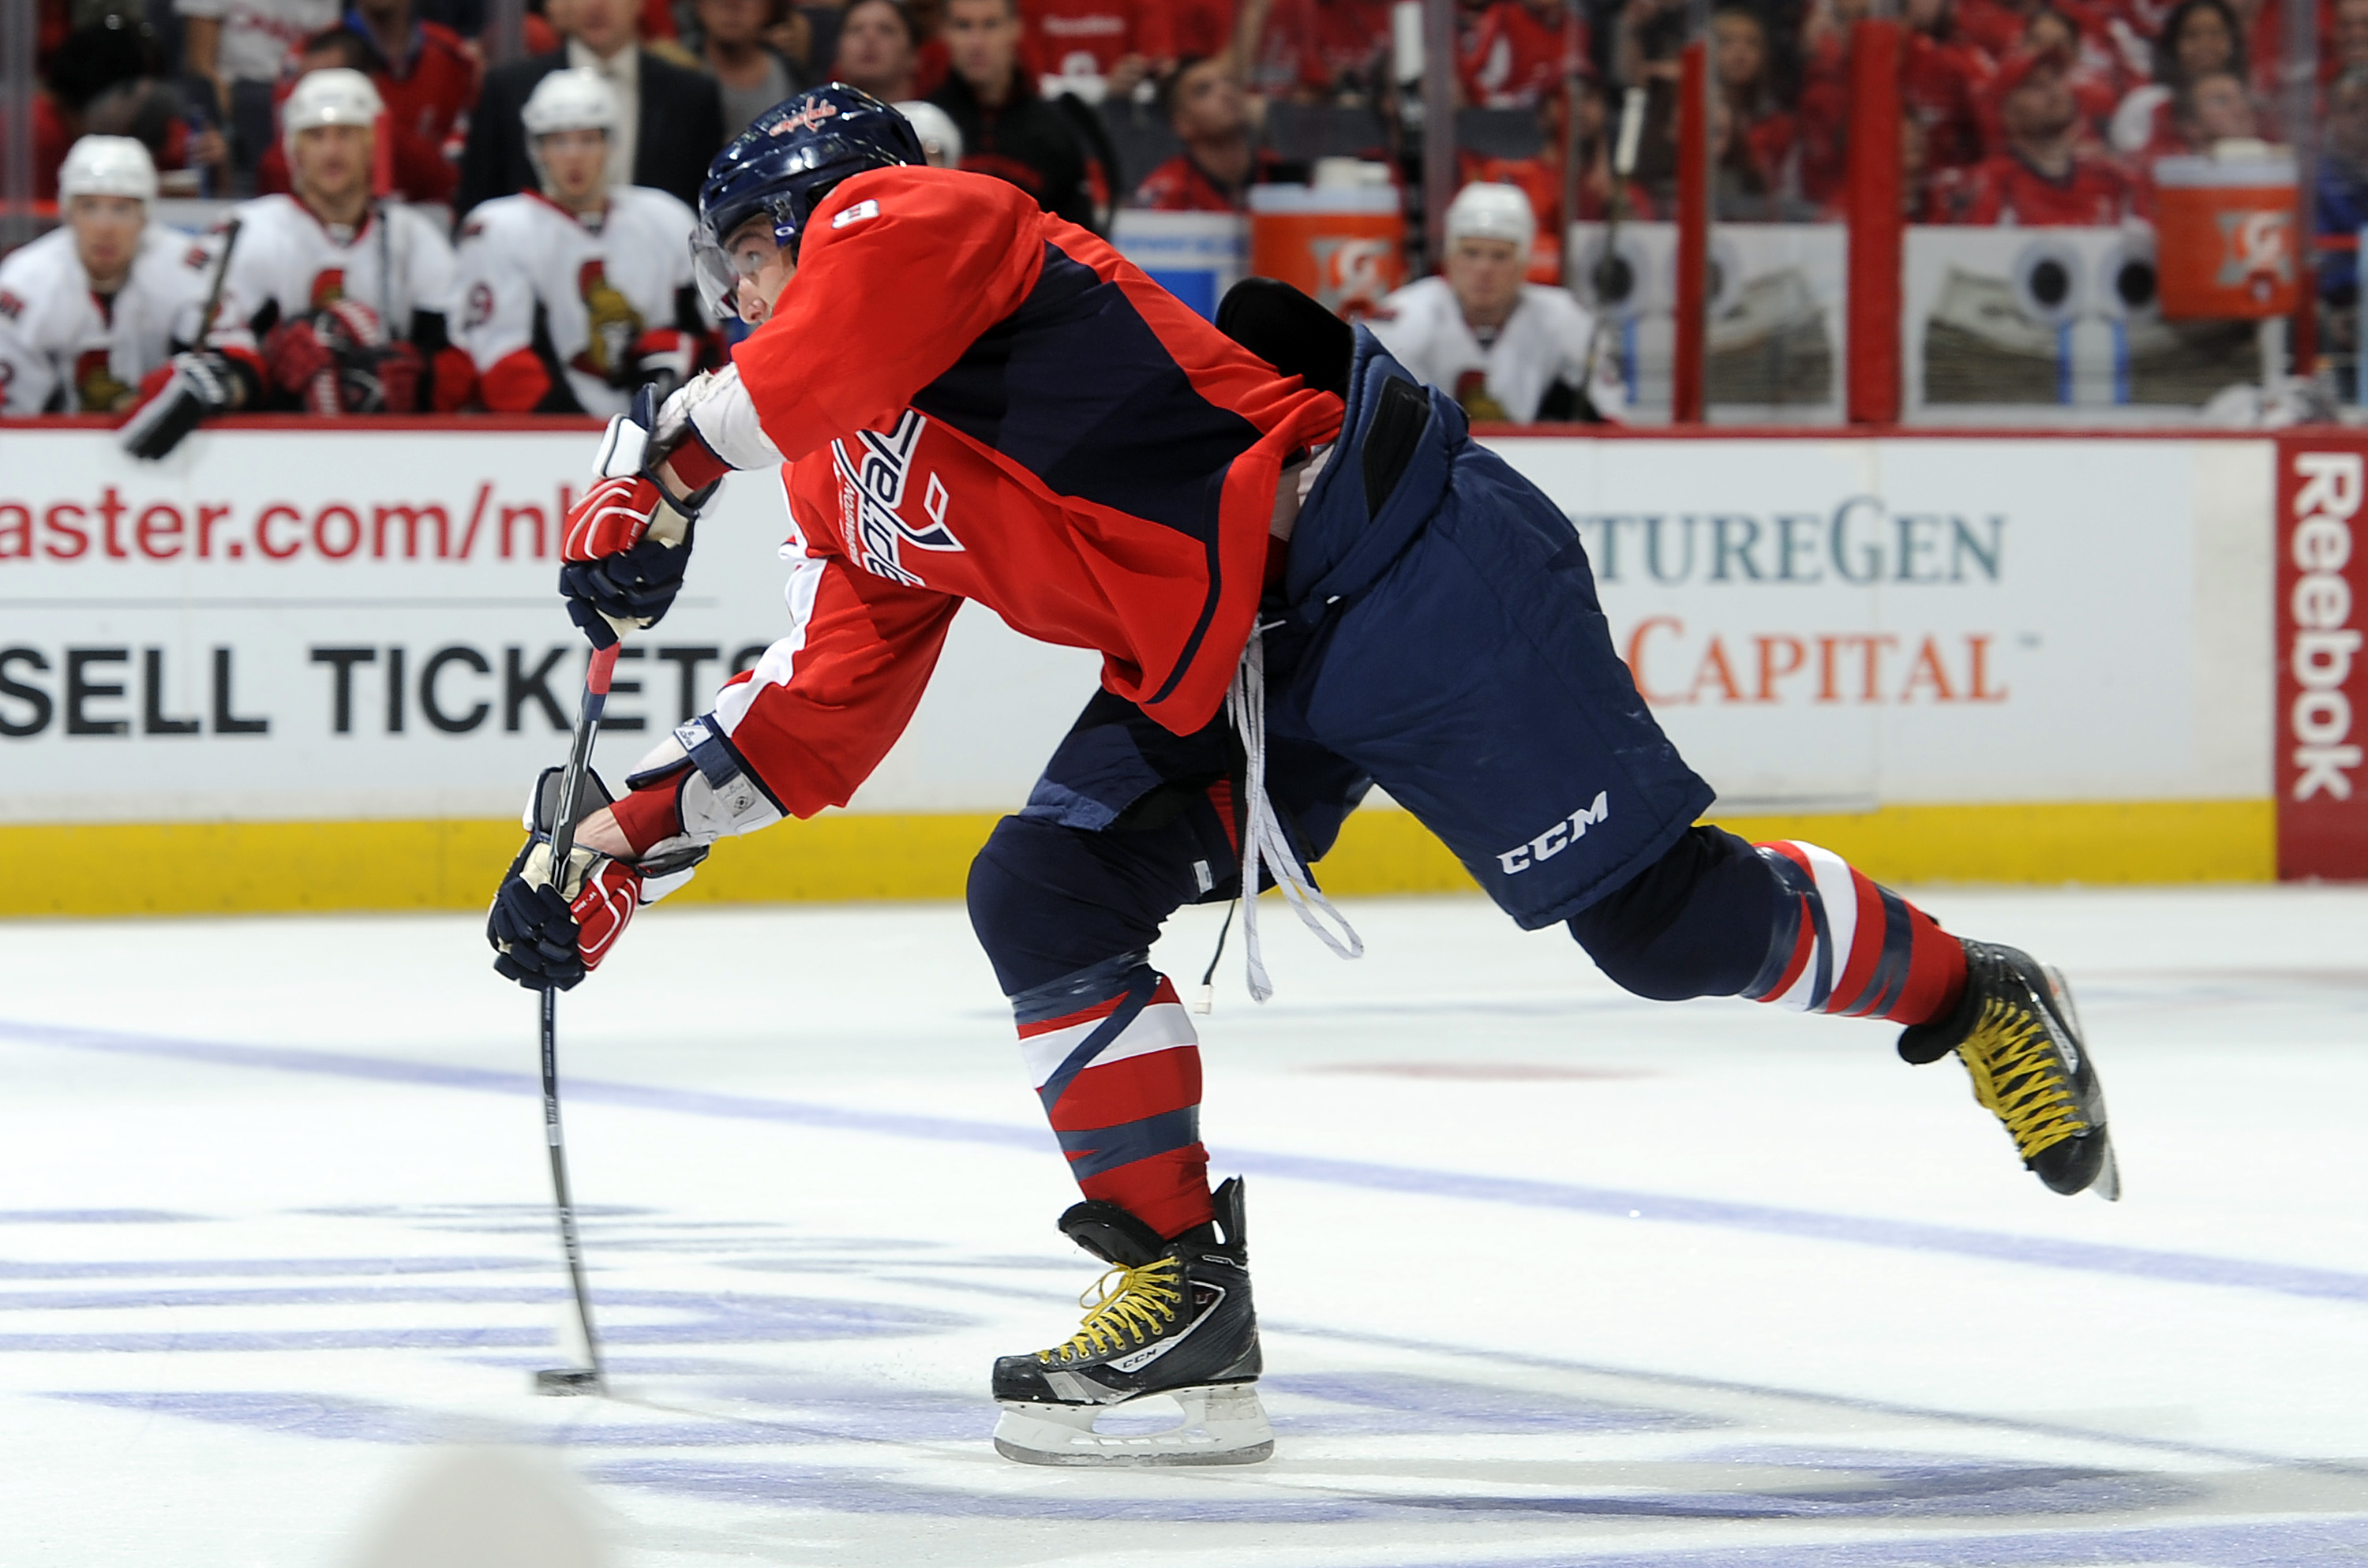 WASHINGTON - OCTOBER 11:  Alex Ovechkin #8 of the Washington Capitals shoots the puck against the Ottawa Senators at the Verizon Center on October 11, 2010 in Washington, DC. The Capitals won the game 3-2. (Photo by Greg Fiume/Getty Images)